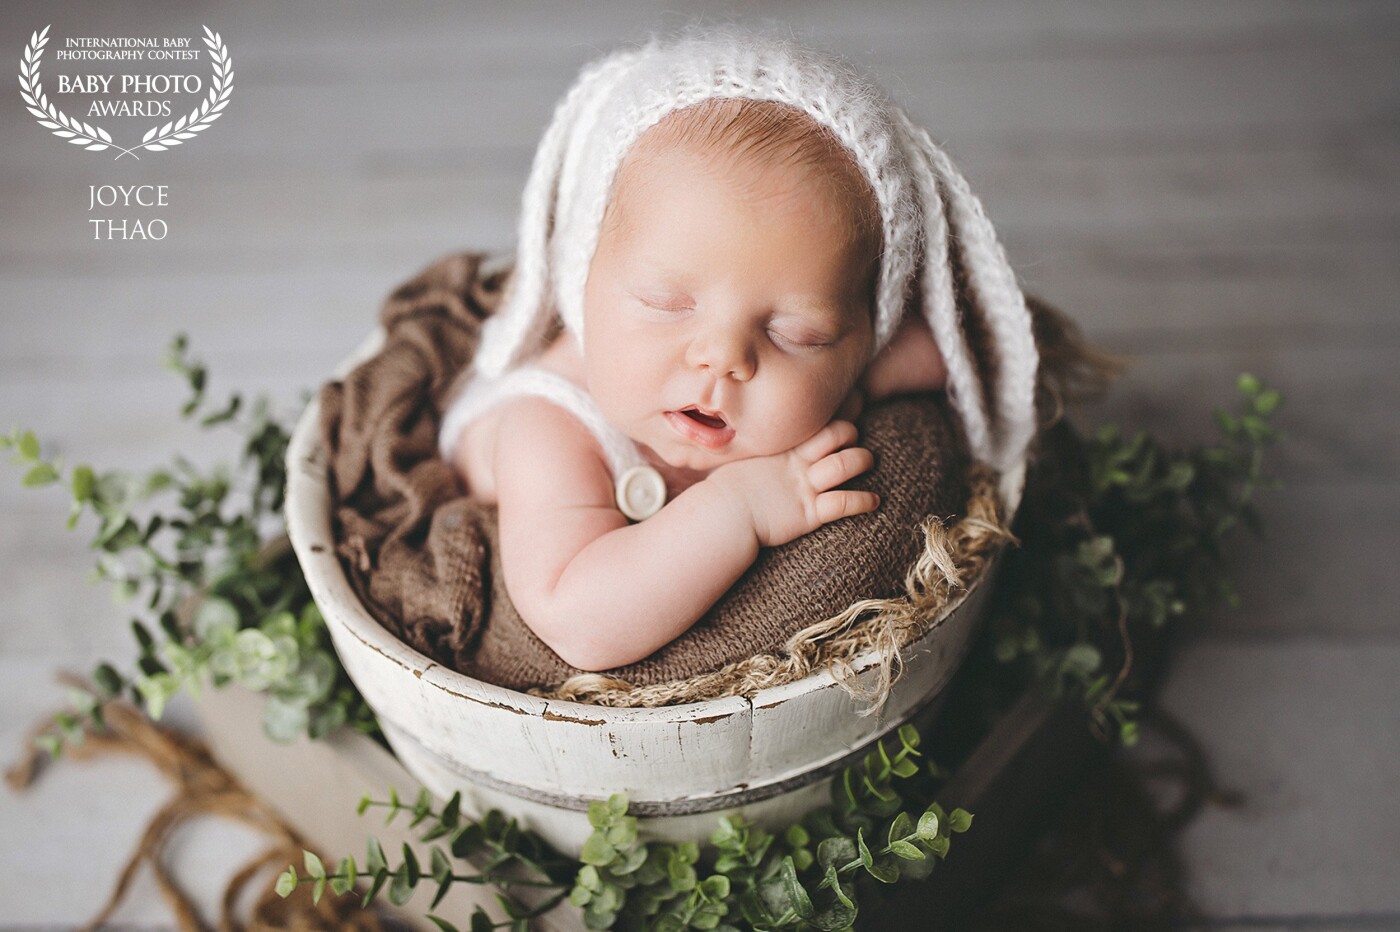 Mom had asked for an Easter/Earth Day themed session because the baby was going to be arriving close to that timeframe... and then RONA happened... and we weren't able to photograph this little fella until a month later! I must say... he did such a great job snoozing away even at almost 1-month-old! Cutest little bunny ever.